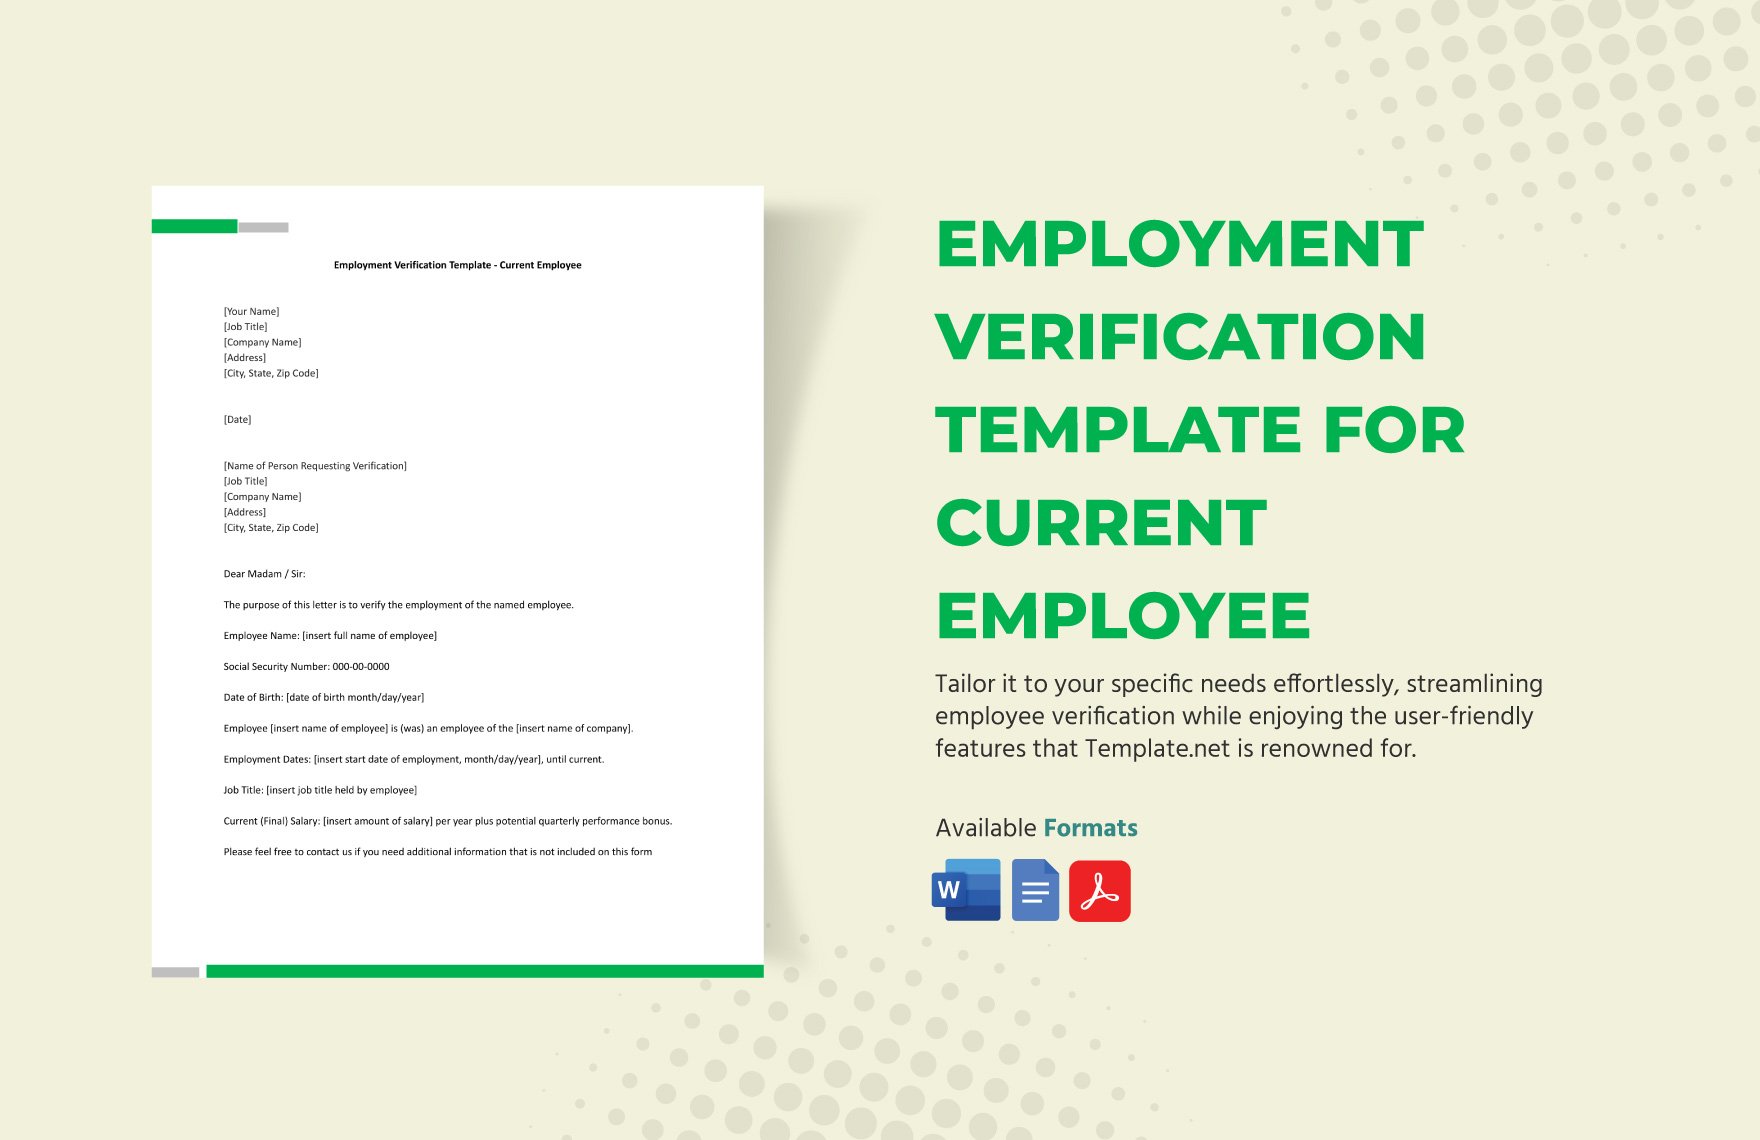 Employment Verification Template for Current Employee